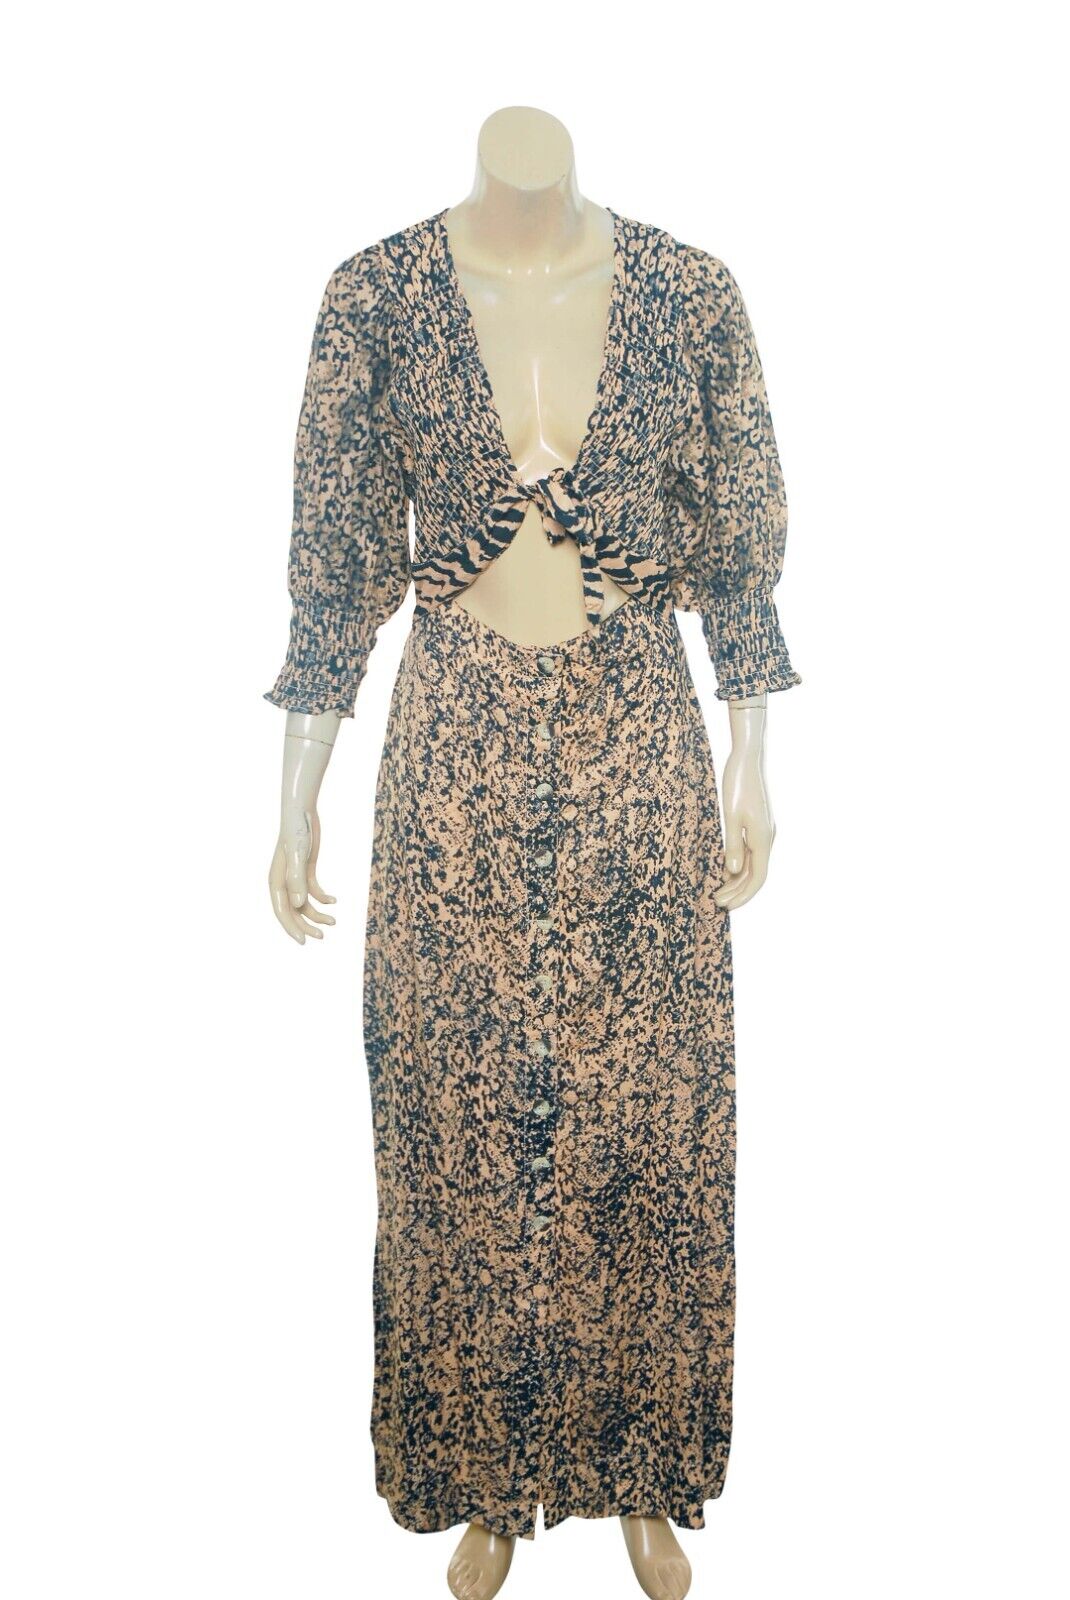 Free People String Of Hearts Printed Maxi Dress